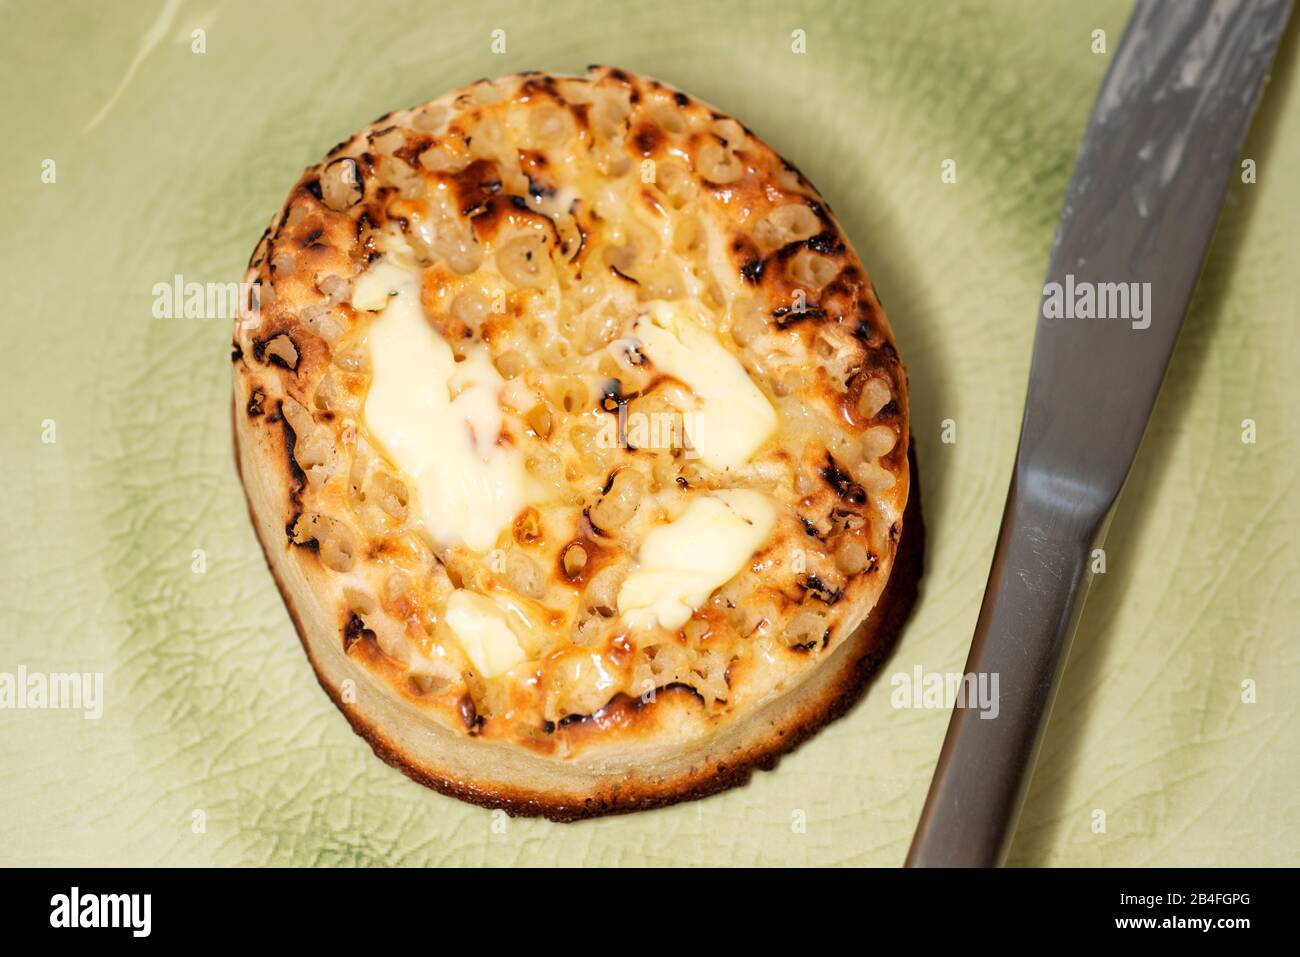 Buttered toasted crumpet Stock Photo